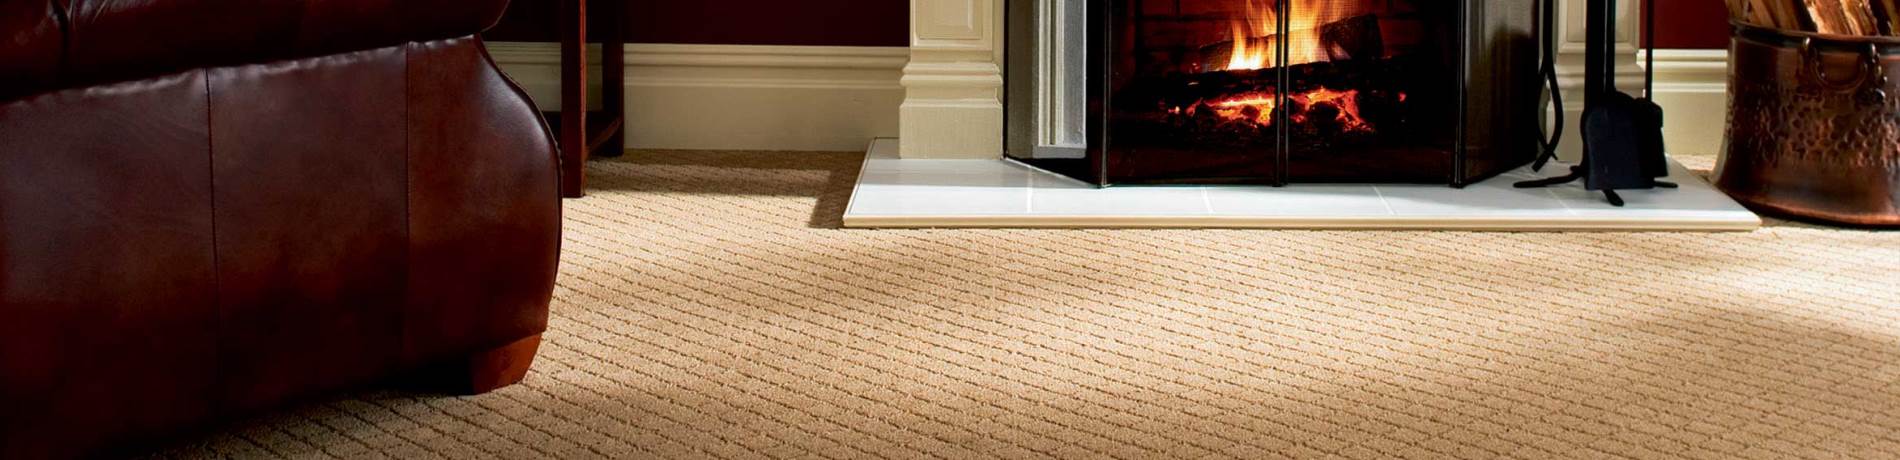 Carpet Cleaning Adelaide Services Give the Cleanest Floor to Step on Health